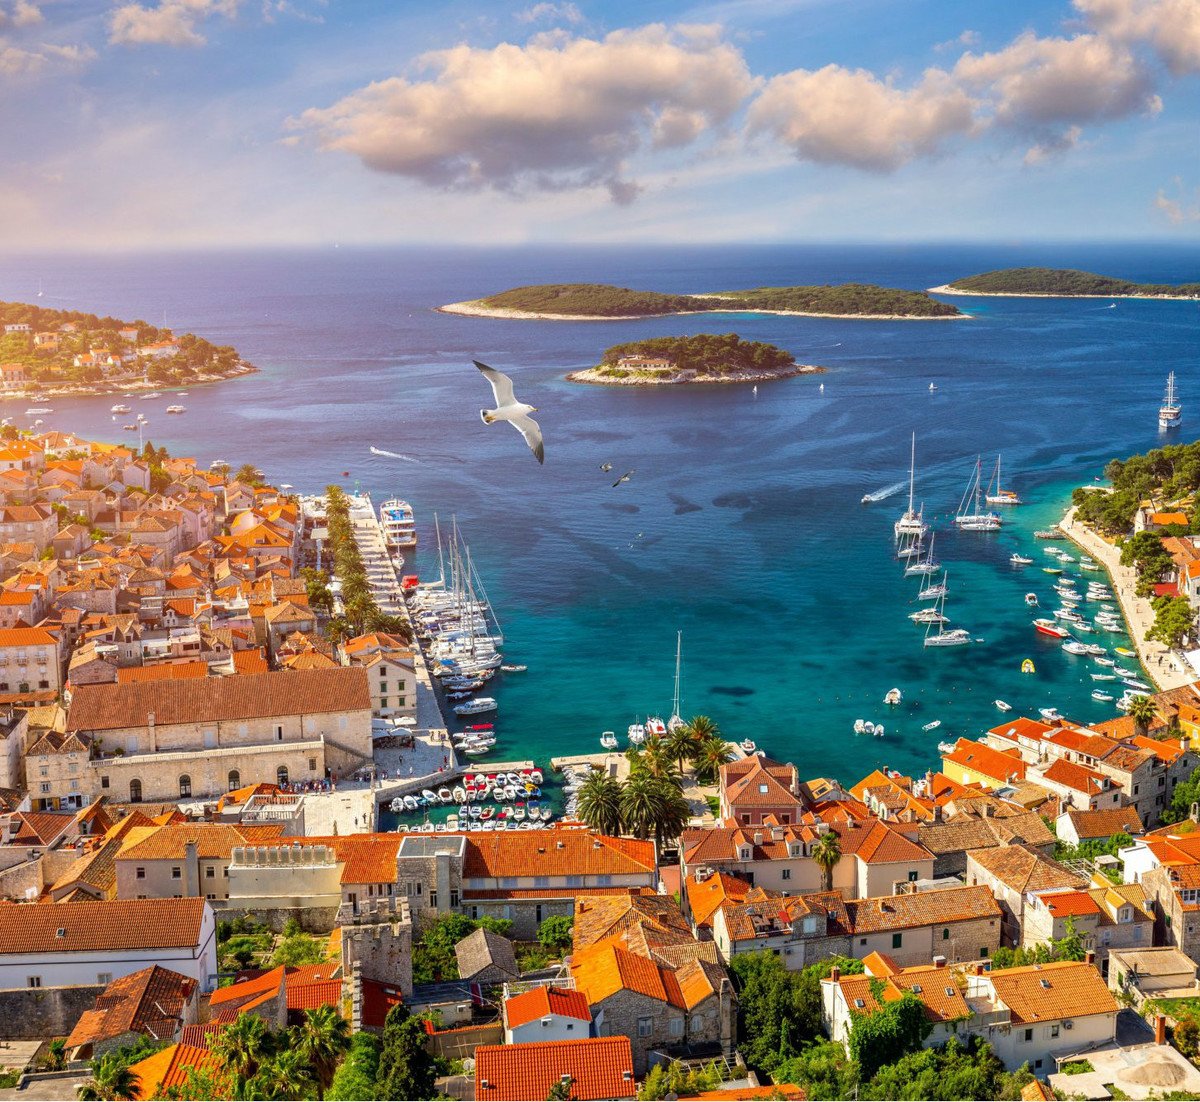 The famous Hvar town  is a must-visit. If you can, do it in the preseason